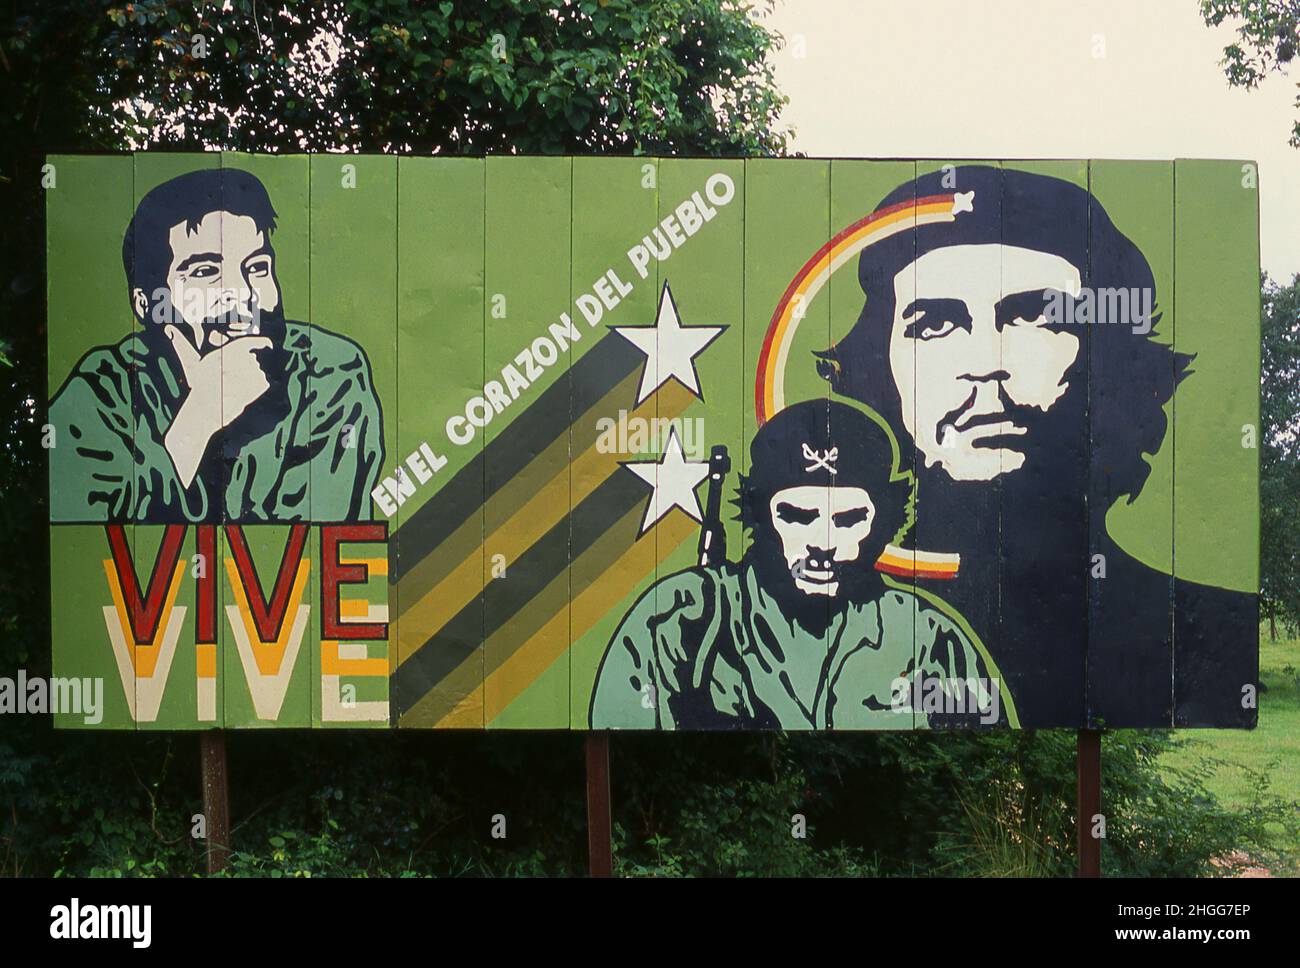 Cuba: 'He lives in the hearts of the people', a Che Guevara poster outside a small town in Matanzas Province. While living in Mexico City, Che Guevara (1928 - 1967) met Raúl and Fidel Castro, joined their 26th of July Movement, and sailed to Cuba aboard the yacht, Granma, with the intention of overthrowing U.S.-backed Cuban dictator Fulgencio Batista. Guevara rose to prominence among the insurgents, was promoted to second-in-command, and played a pivotal role in the victorious two year guerrilla campaign that deposed the Batista regime. Stock Photo